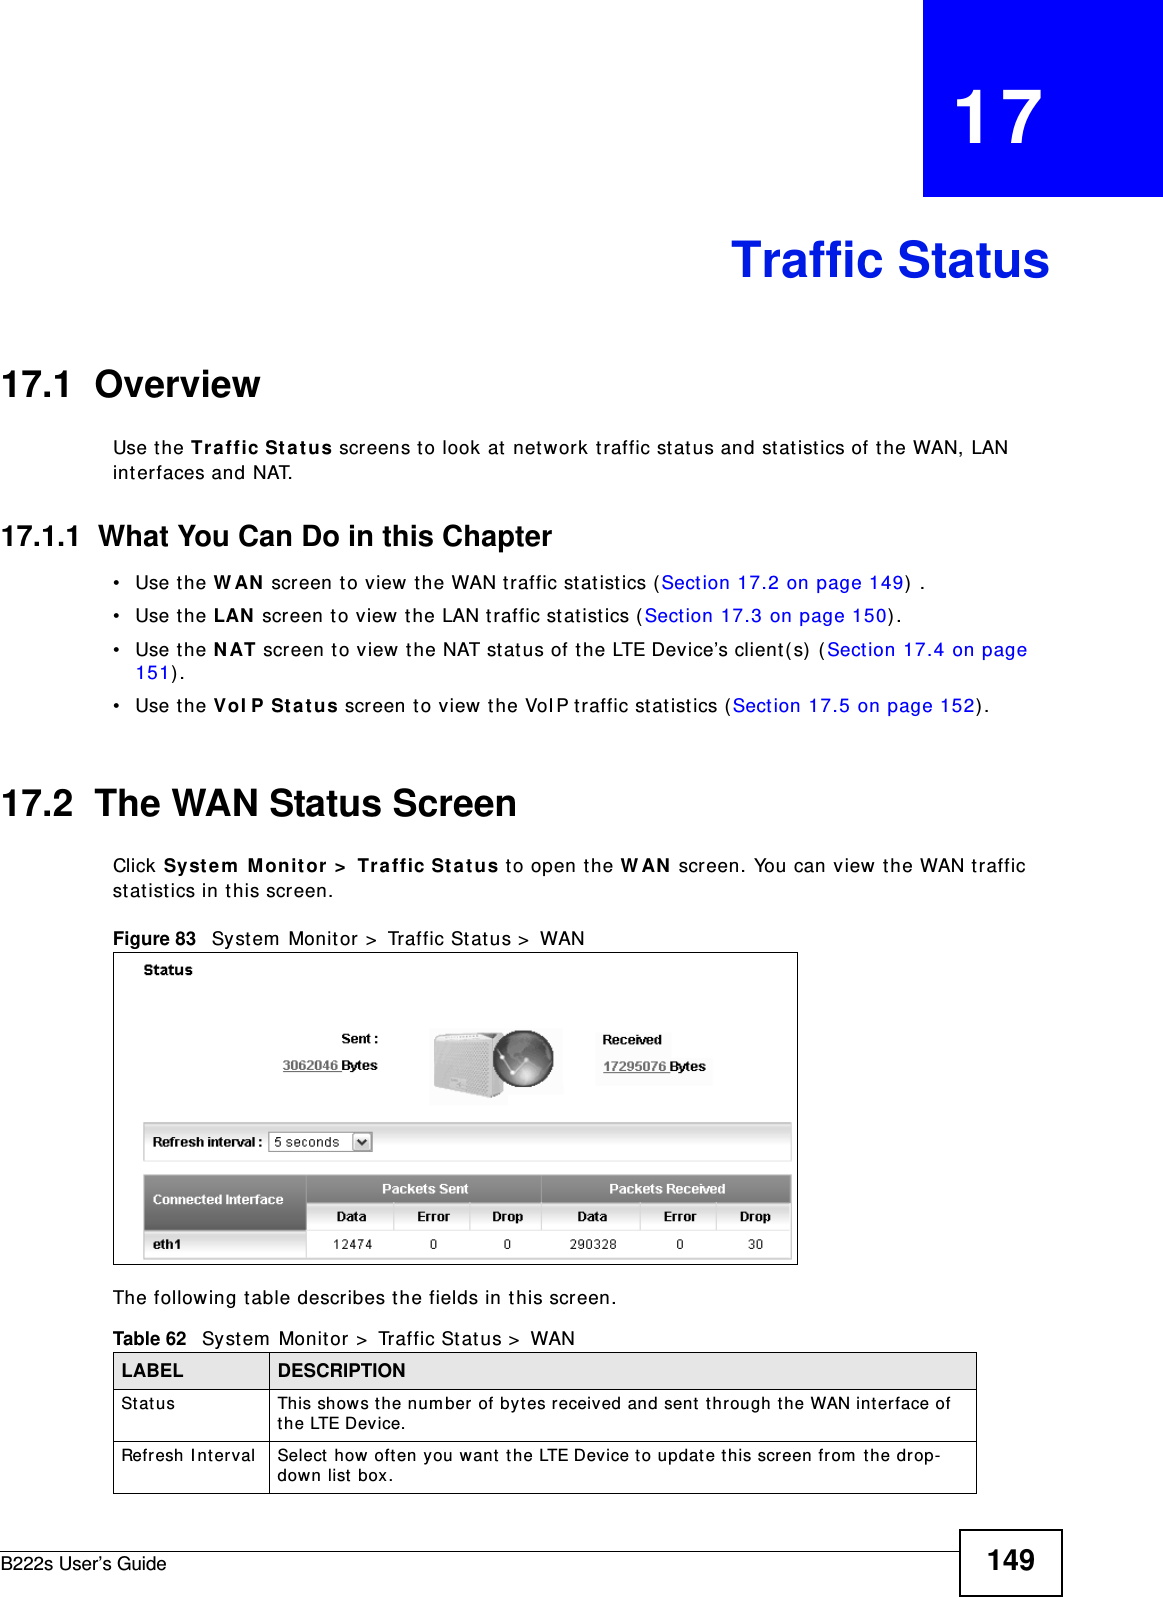 B222s User’s Guide 149CHAPTER   17Traffic Status17.1  OverviewUse t he Tra ffic St at us screens t o look at network traffic stat us and st at ist ics of t he WAN, LAN int erfaces and NAT. 17.1.1  What You Can Do in this Chapter• Use the W AN  screen t o view the WAN t raffic stat ist ics (Section 17.2 on page 149)  .• Use the LAN screen t o view the LAN t raffic statistics ( Sect ion 17.3 on page 150) .• Use the N AT scr een t o view t he NAT stat us of t he LTE Device’s client ( s)  ( Sect ion 17.4 on page 151) .• Use the VoI P Sta t us screen to view t he VoI P traffic stat ist ics (Sect ion 17.5 on page 152) .17.2  The WAN Status Screen Click Syst e m  Monit or  &gt;  Tr affic St a tus t o open t he W AN  screen. You can view t he WAN t raffic st at ist ics in t his screen.Figure 83   System  Monitor &gt;  Traffic Stat us &gt;  WANThe following t able describes t he fields in t his screen.   Table 62   Syst em  Monit or &gt;  Traffic St atus &gt;  WANLABEL DESCRIPTIONSt atus This shows t he num ber of bytes received and sent  t hrough the WAN int erface of the LTE Device.Refresh I nt erval Select  how  oft en y ou want  the LTE Device t o updat e t his screen fr om  t he drop-down list box.